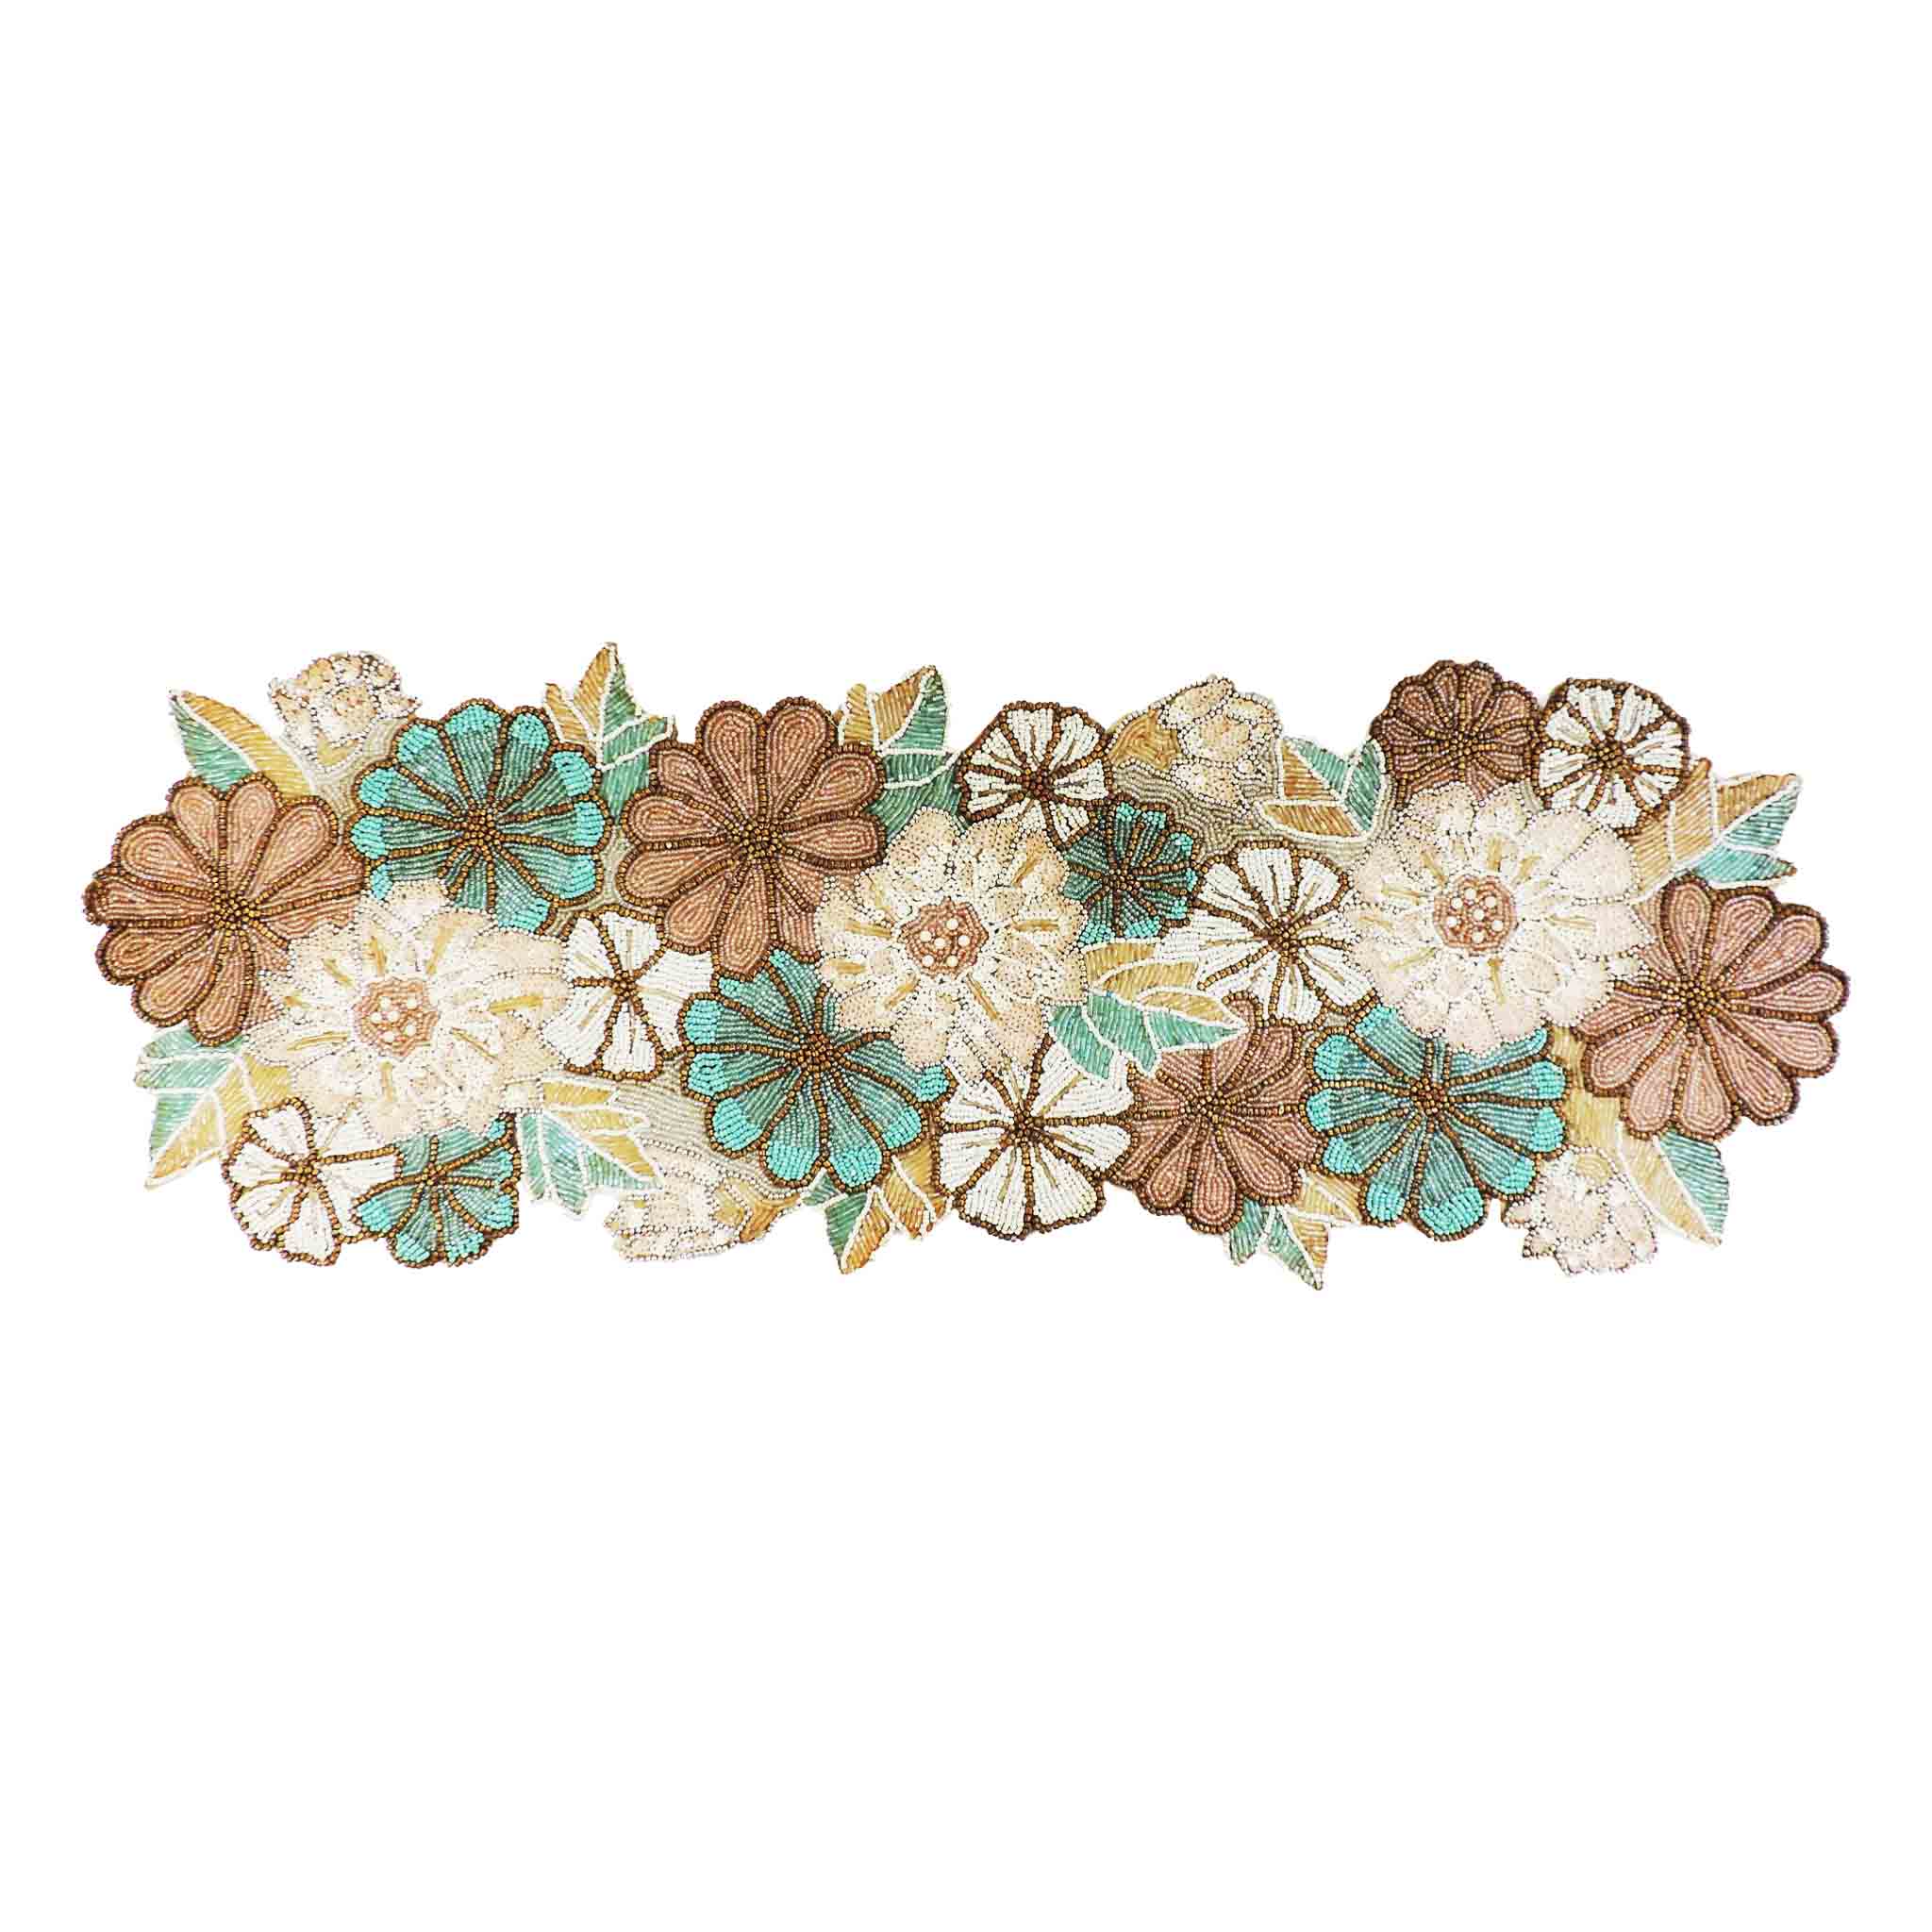 Autumn Blooms Bead Embroidered Table Runner in Teal & Grey